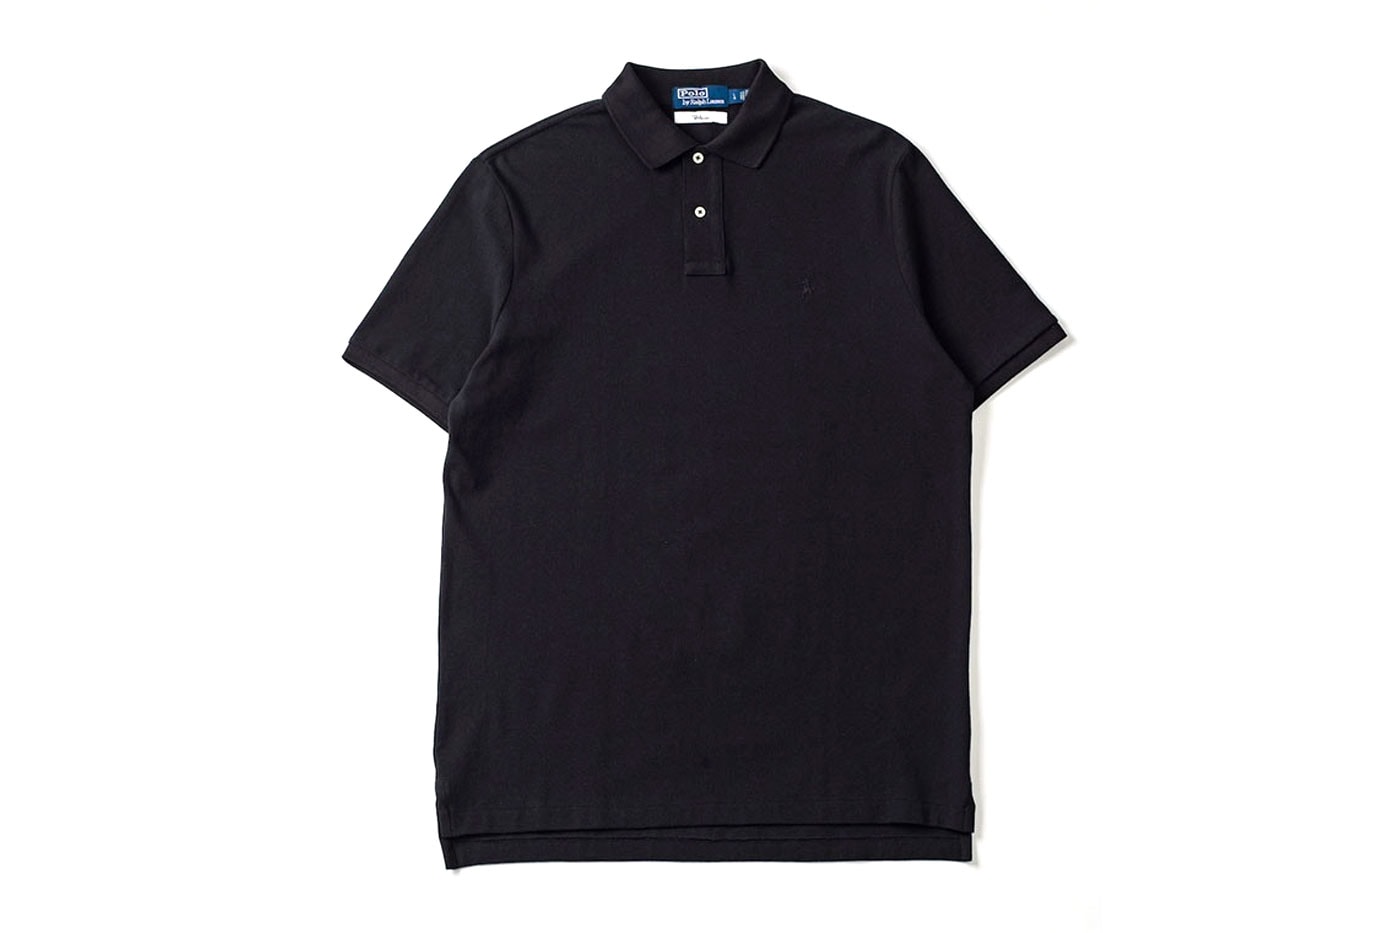 Polo Ralph Lauren Launches Exclusive "Black Collection" for Ron Herman sleek classics crew neck t-shirts sorts oxford shirts 